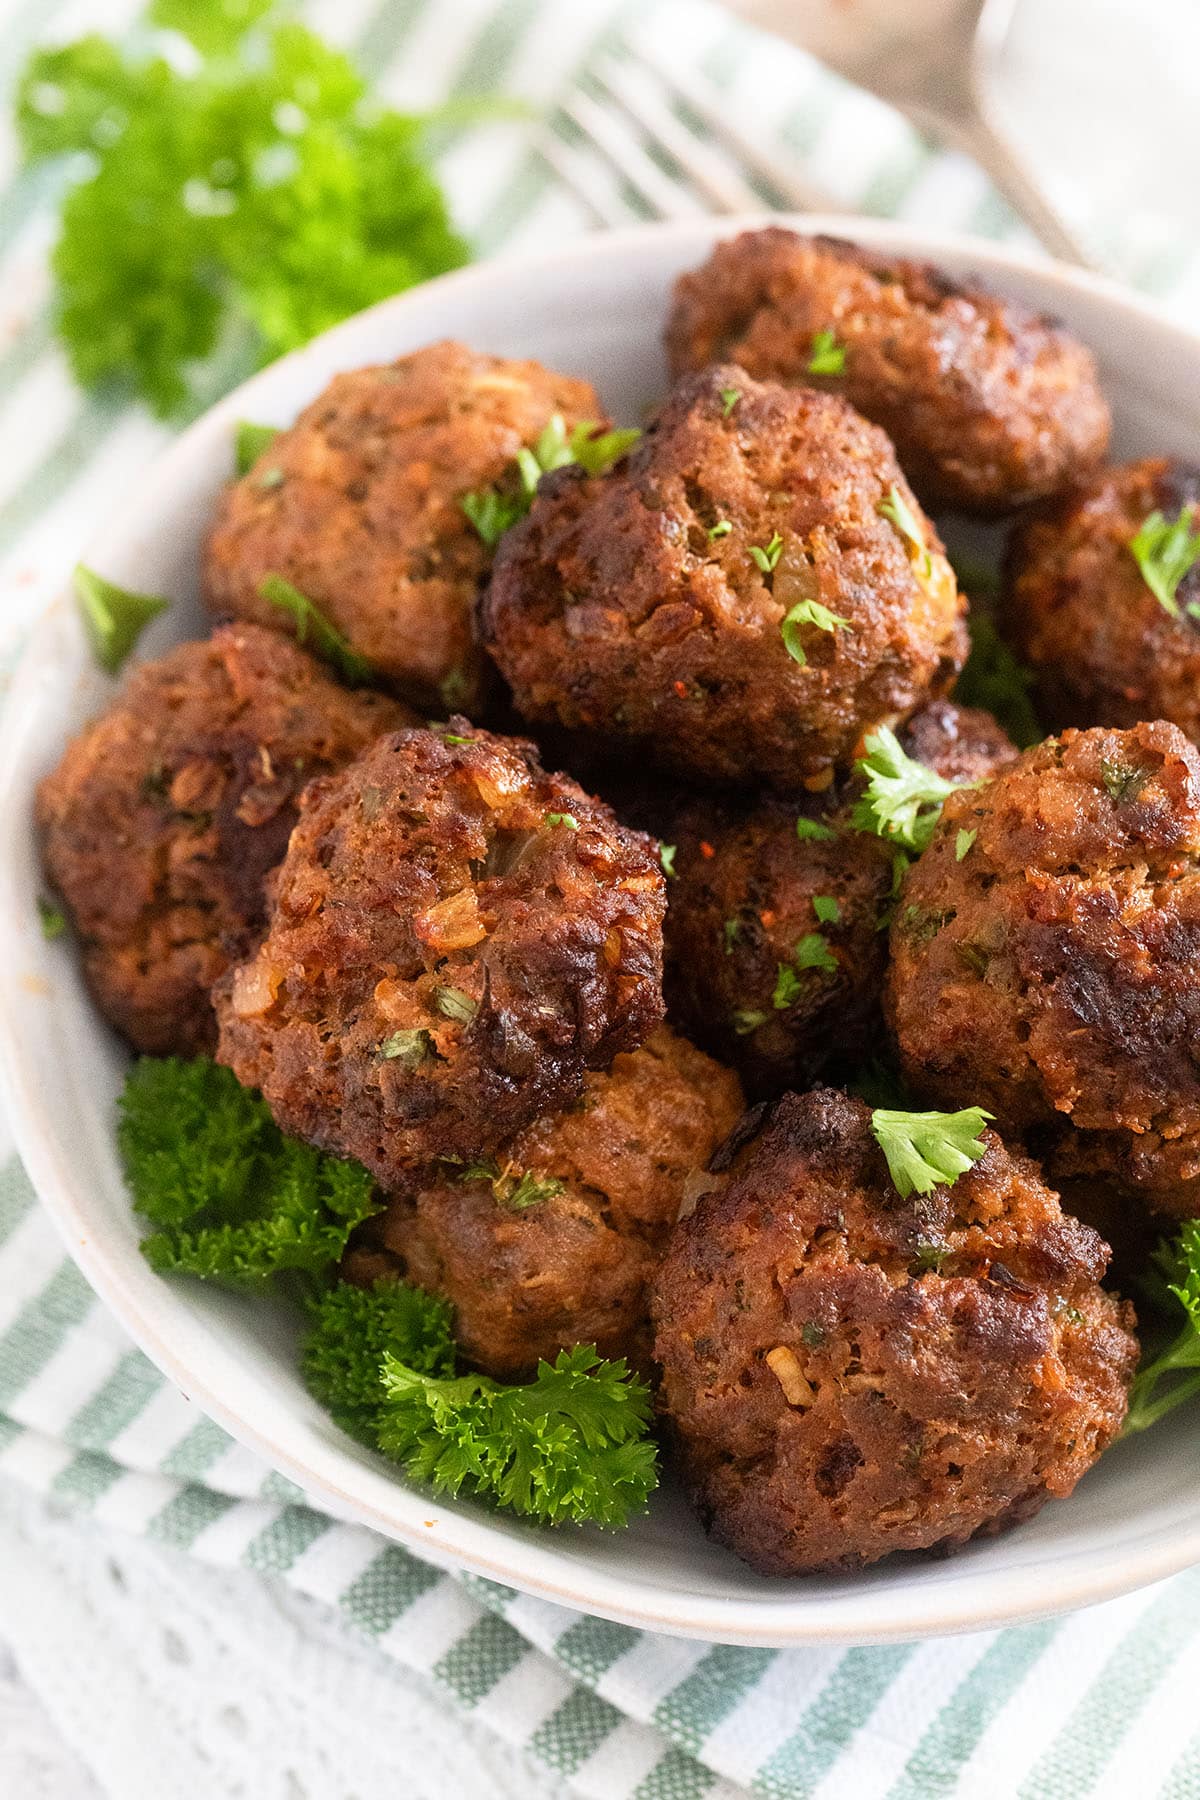 many round meatballs made without eggs in a bowl on a striped kitchen cloth.